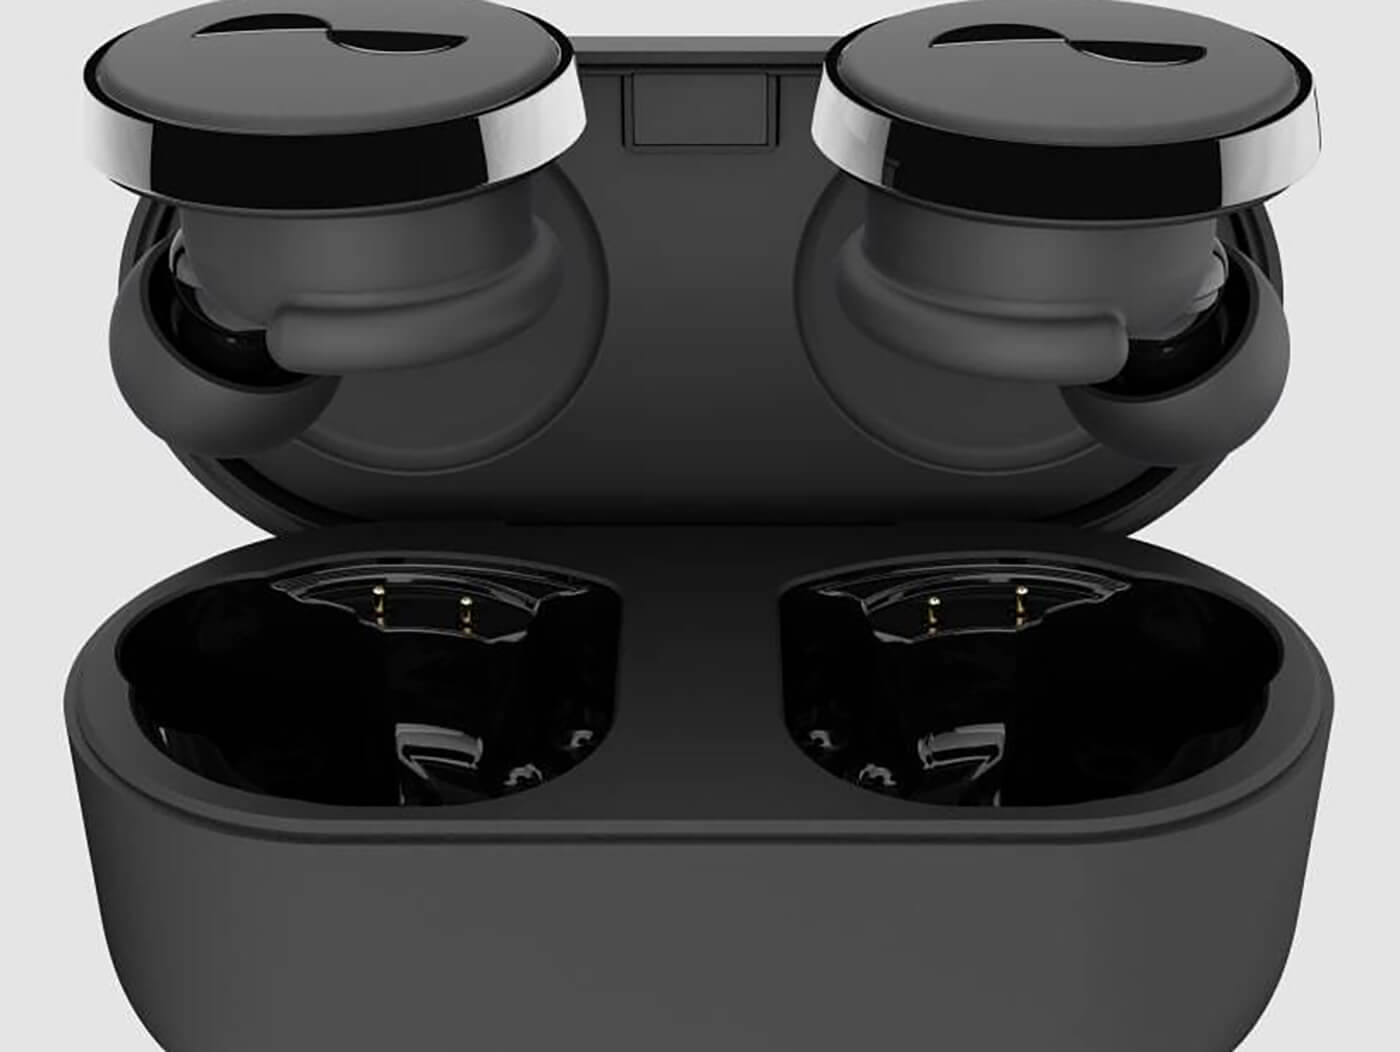 NuraTrue Pro review: Your new favourite wireless earbuds?